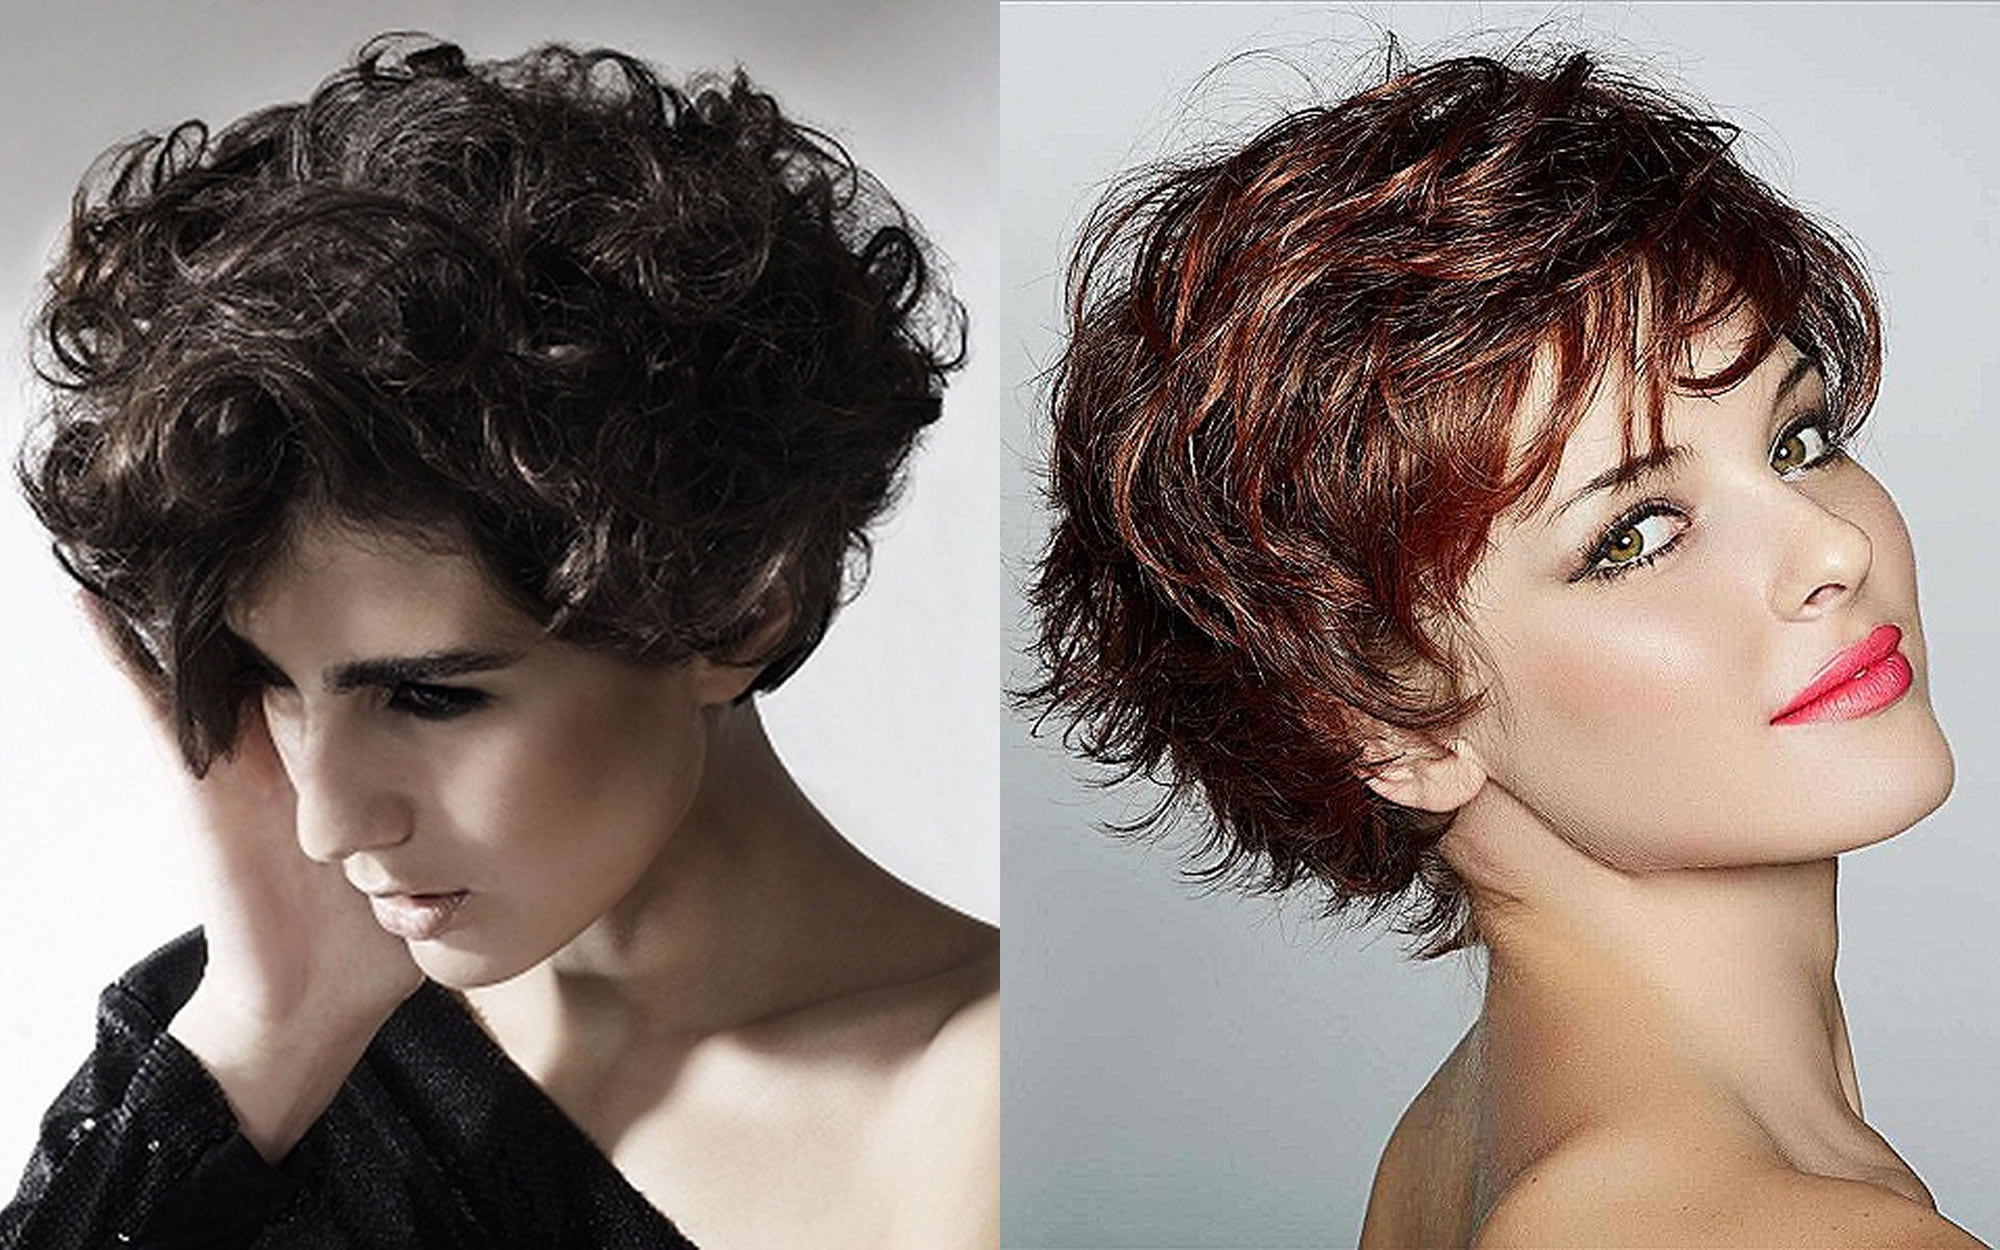 22 Best Curly Short Hairstyles For Women 2018 2019 Page 3 Of 6 